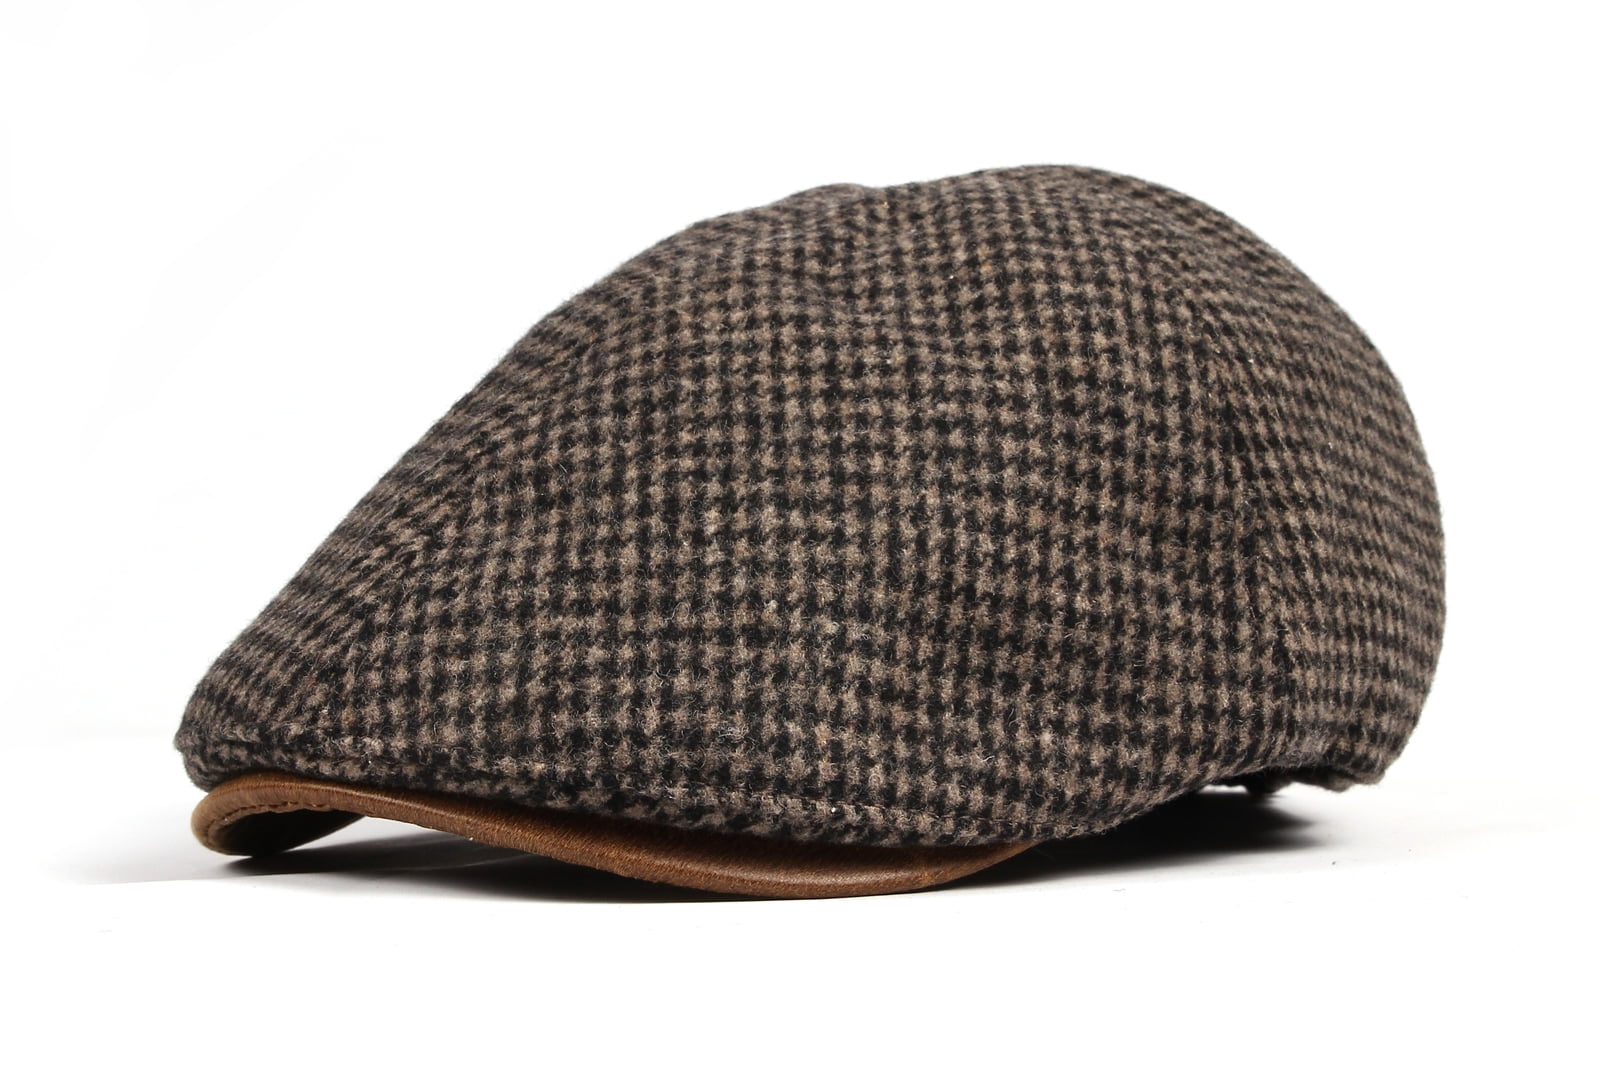 WITHMOONS Béret Casquette Chapeau Winter Tweed Houndstooth Newsboy Hat Faux Leather Brim Flat Cap SL3019